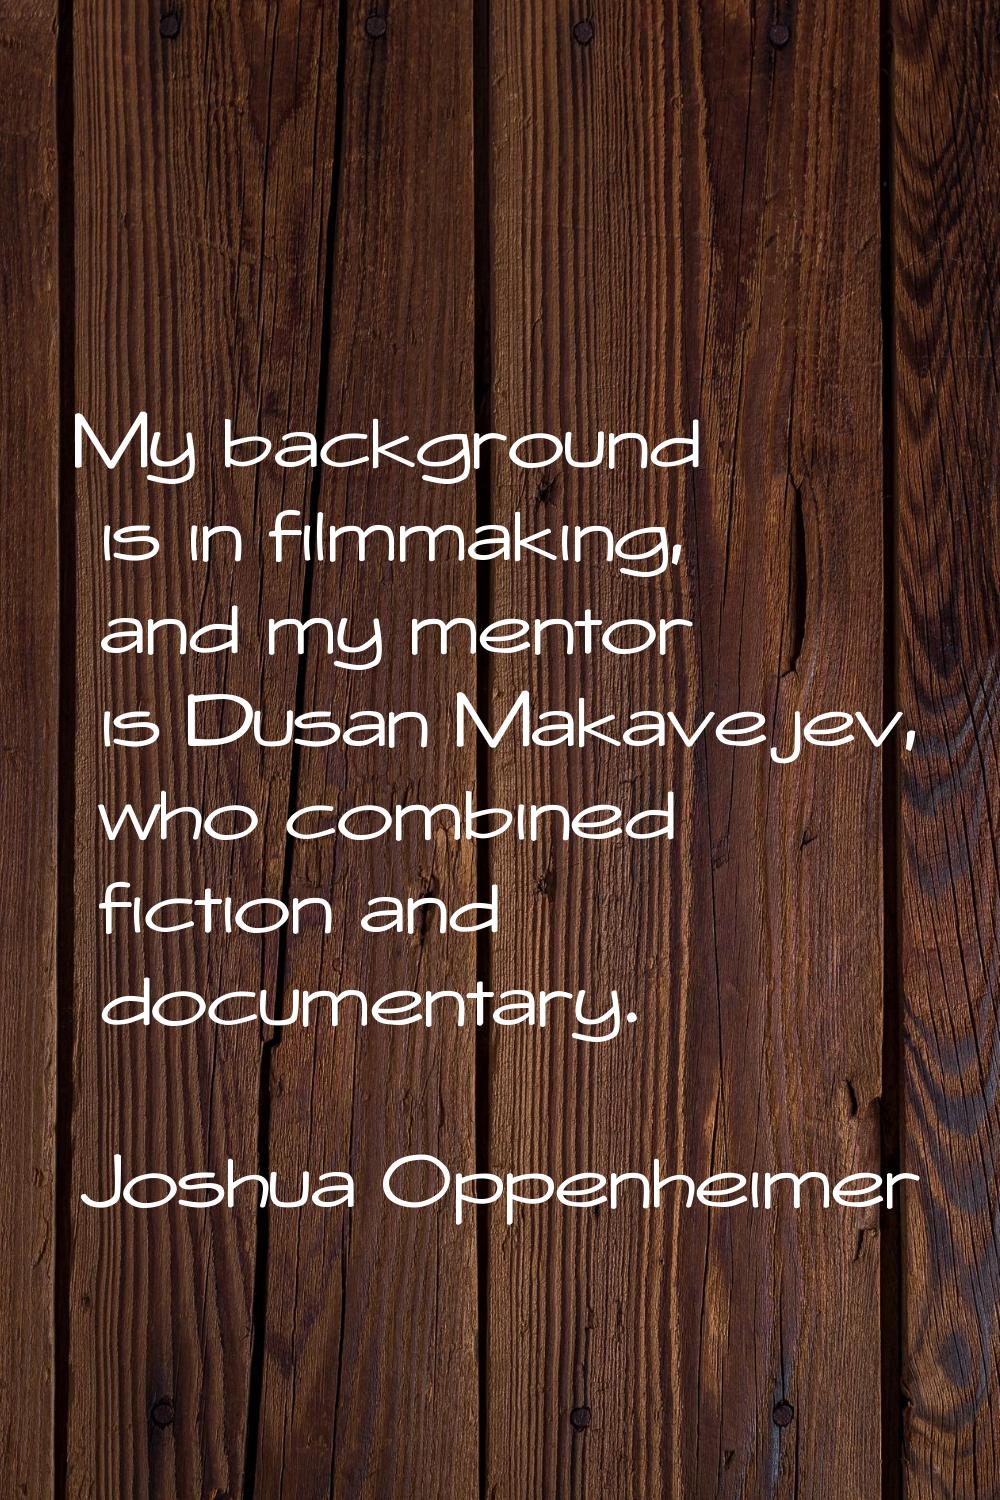 My background is in filmmaking, and my mentor is Dusan Makavejev, who combined fiction and document